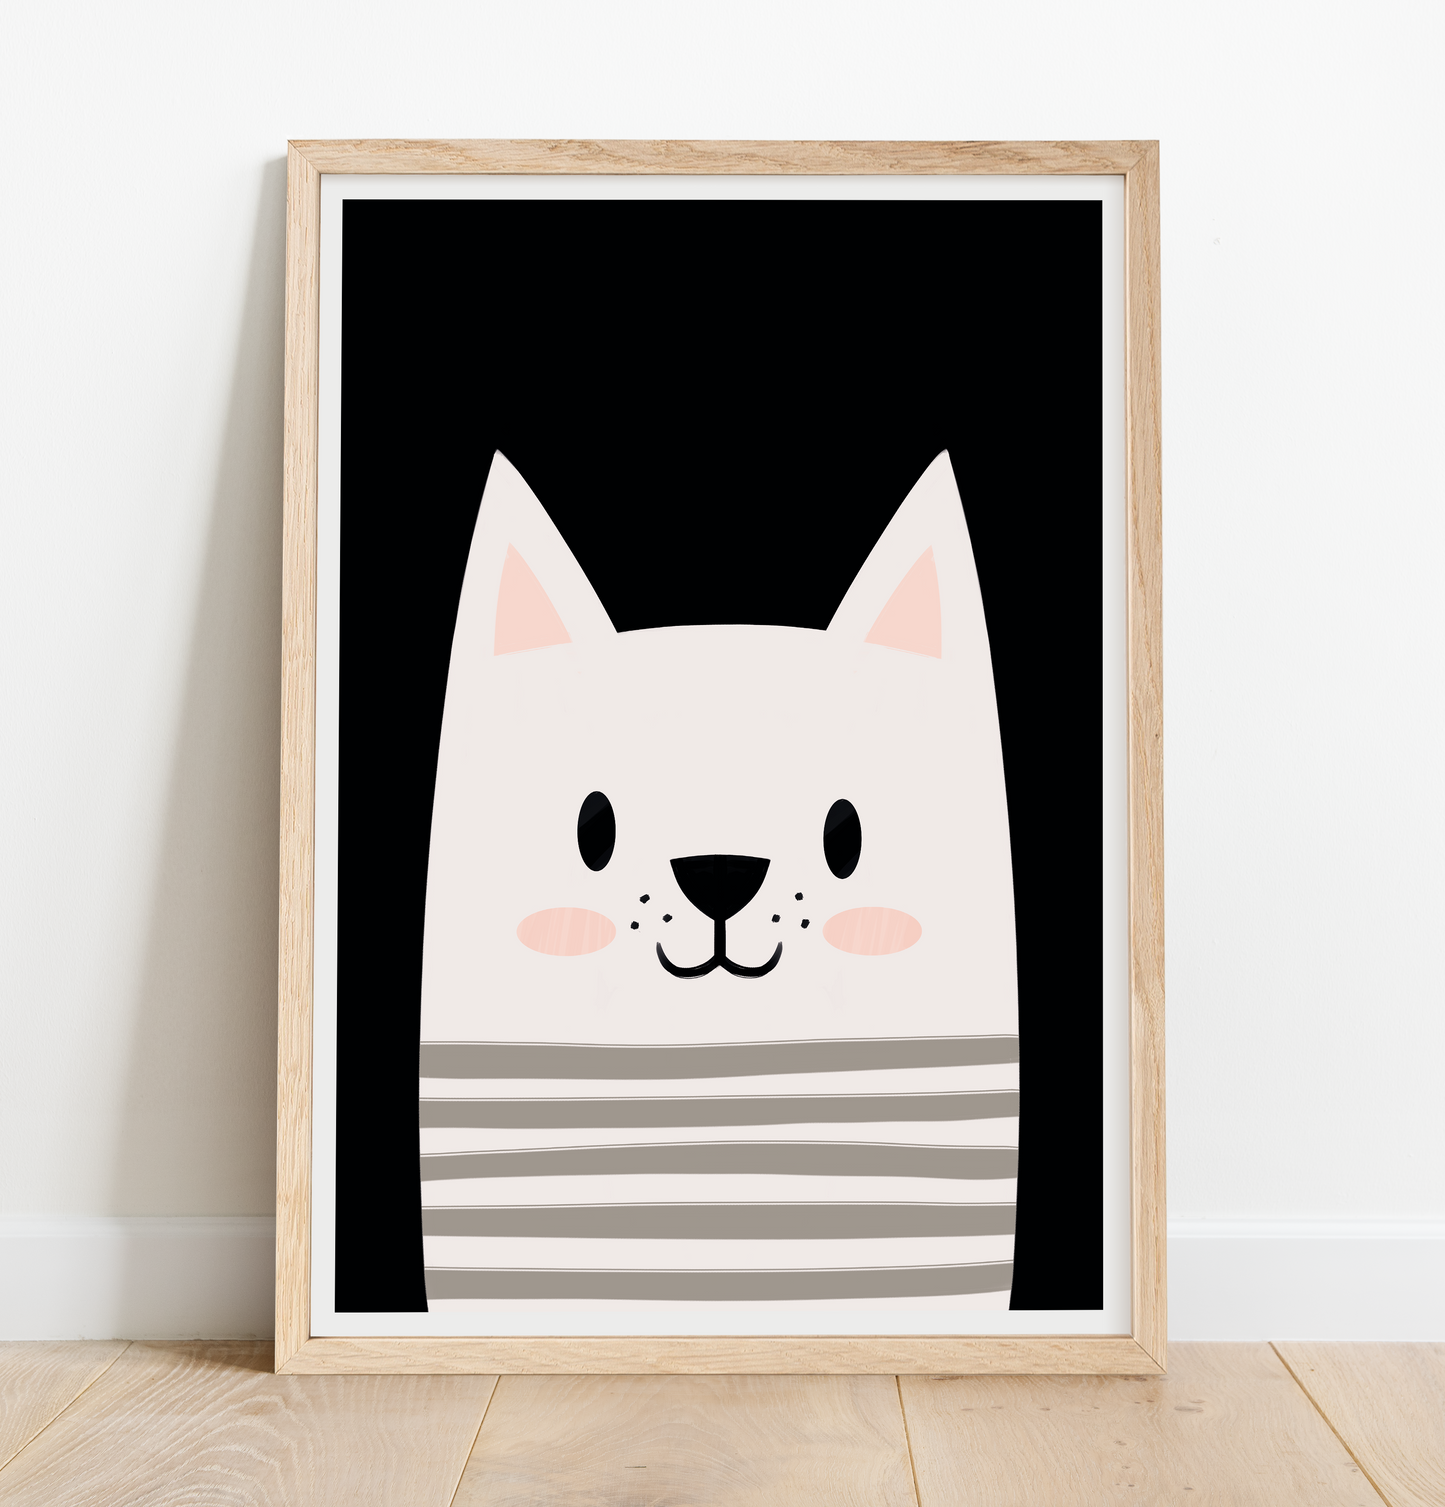 Cat with stripes on black background print